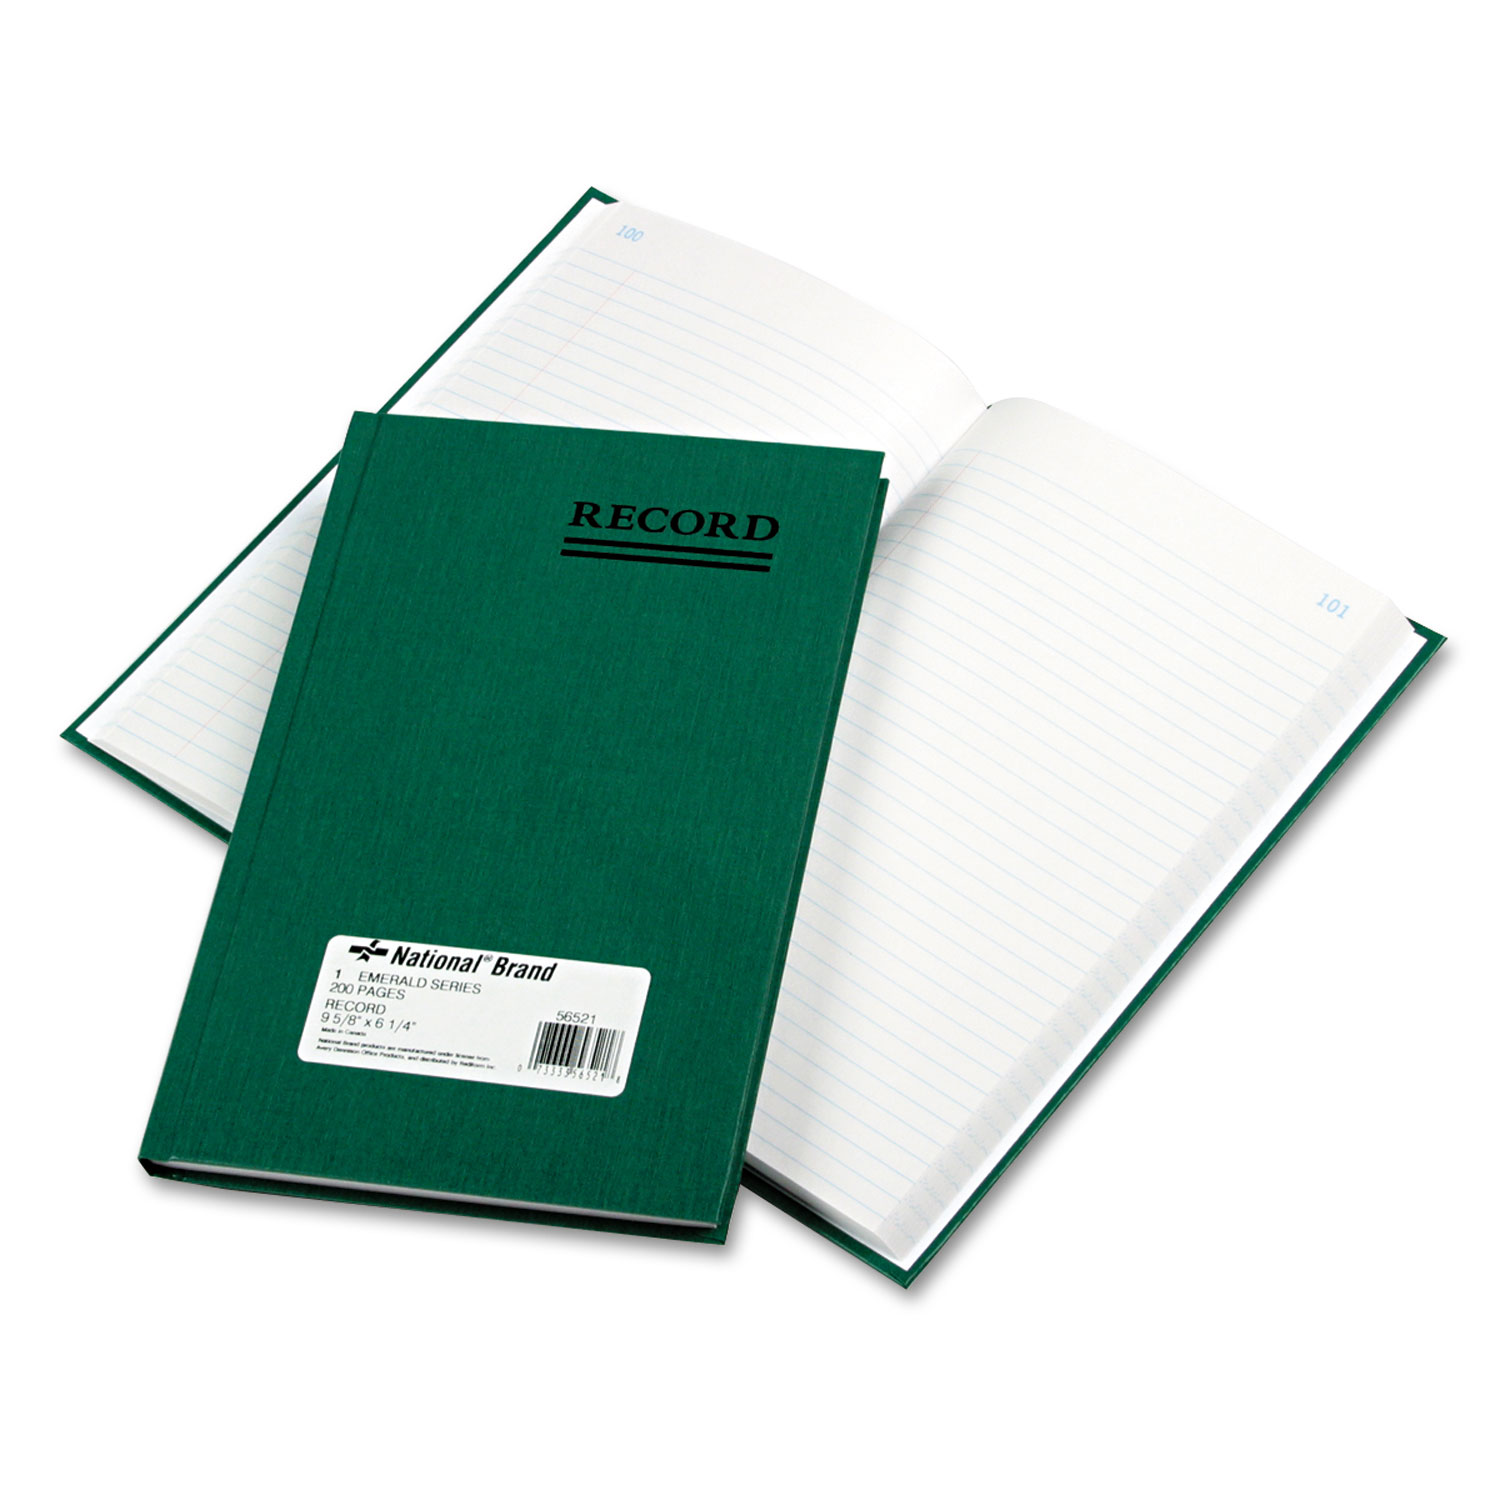 National Brand RED56521 Emerald Series Account Book, Green Cover, 200 Pages, 9 5/8 x 6 1/4